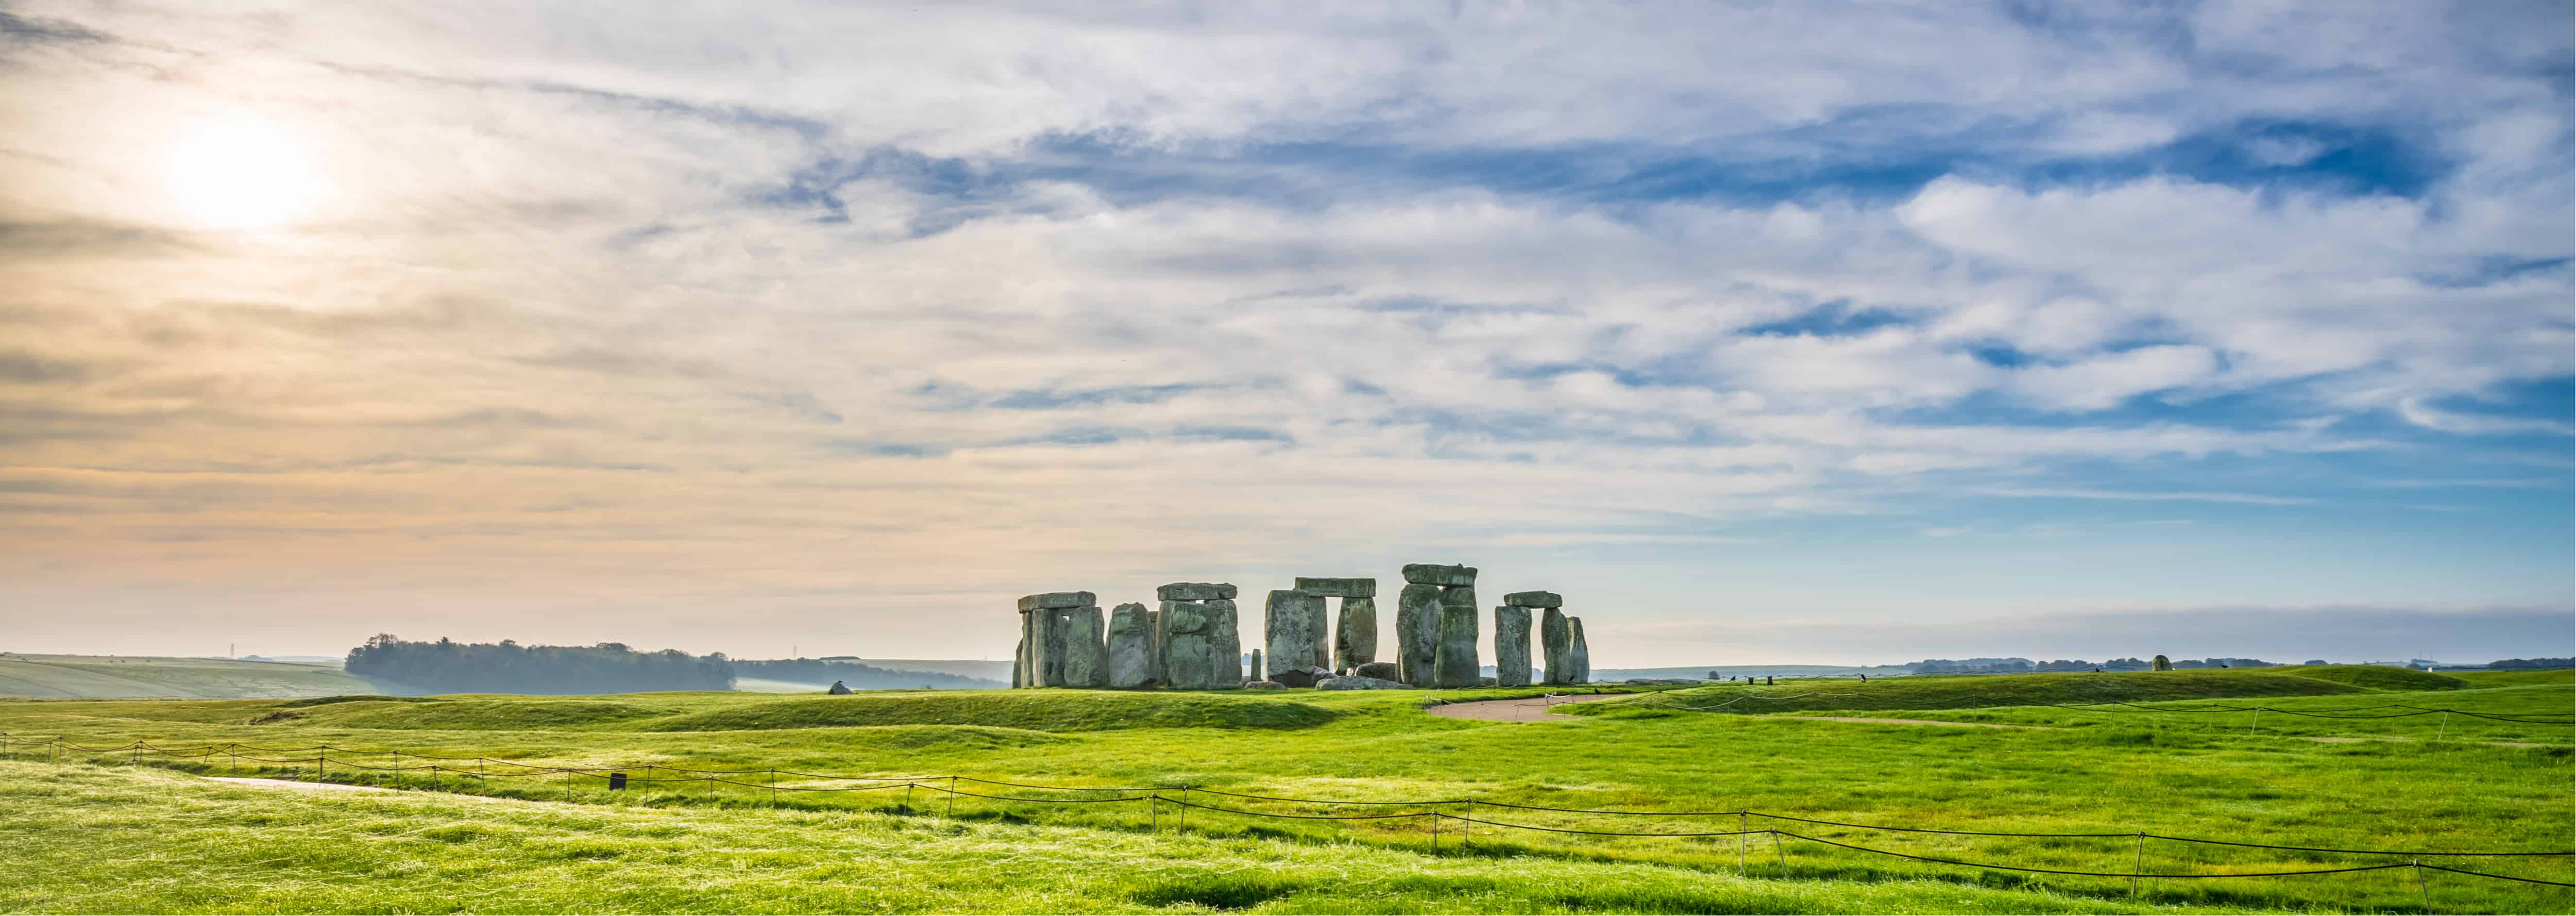 stonehenge express tour from london